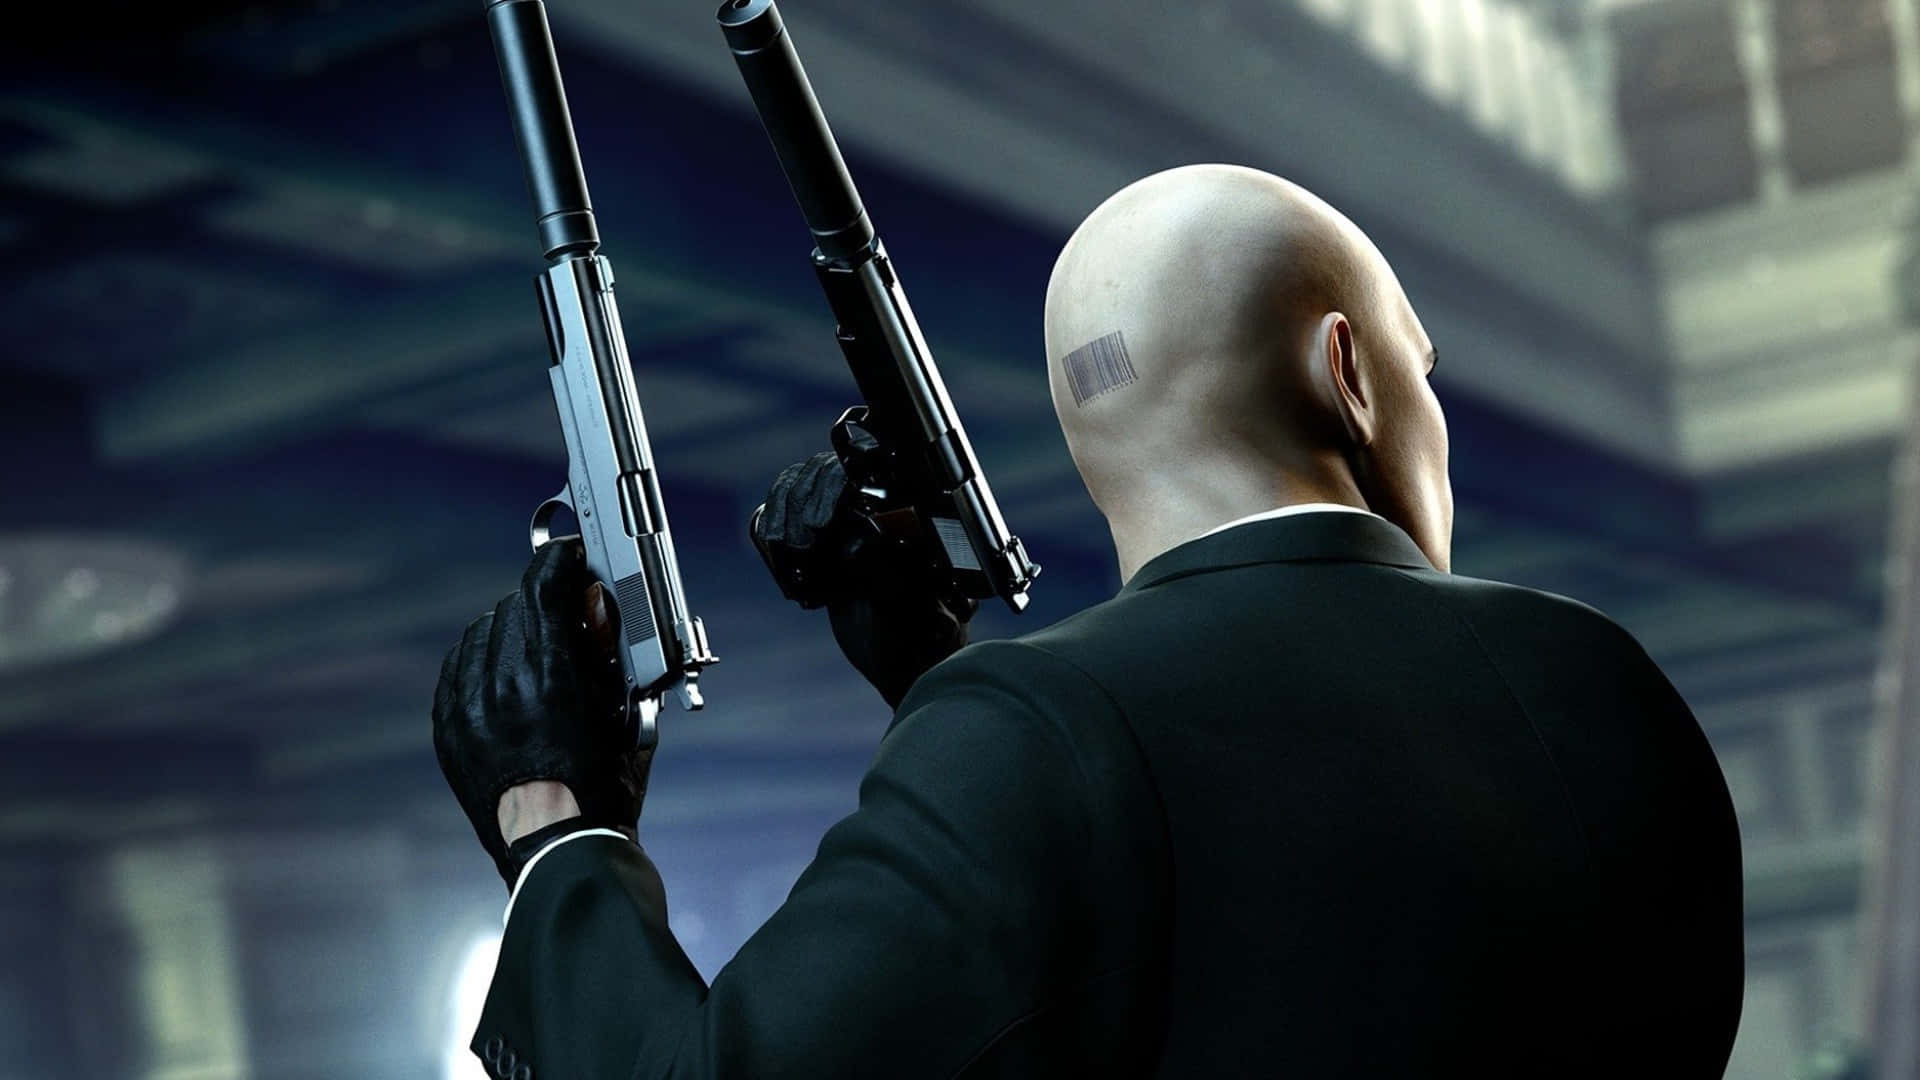 Experience the World of Hitman with an Exciting Desktop Wallpaper Wallpaper